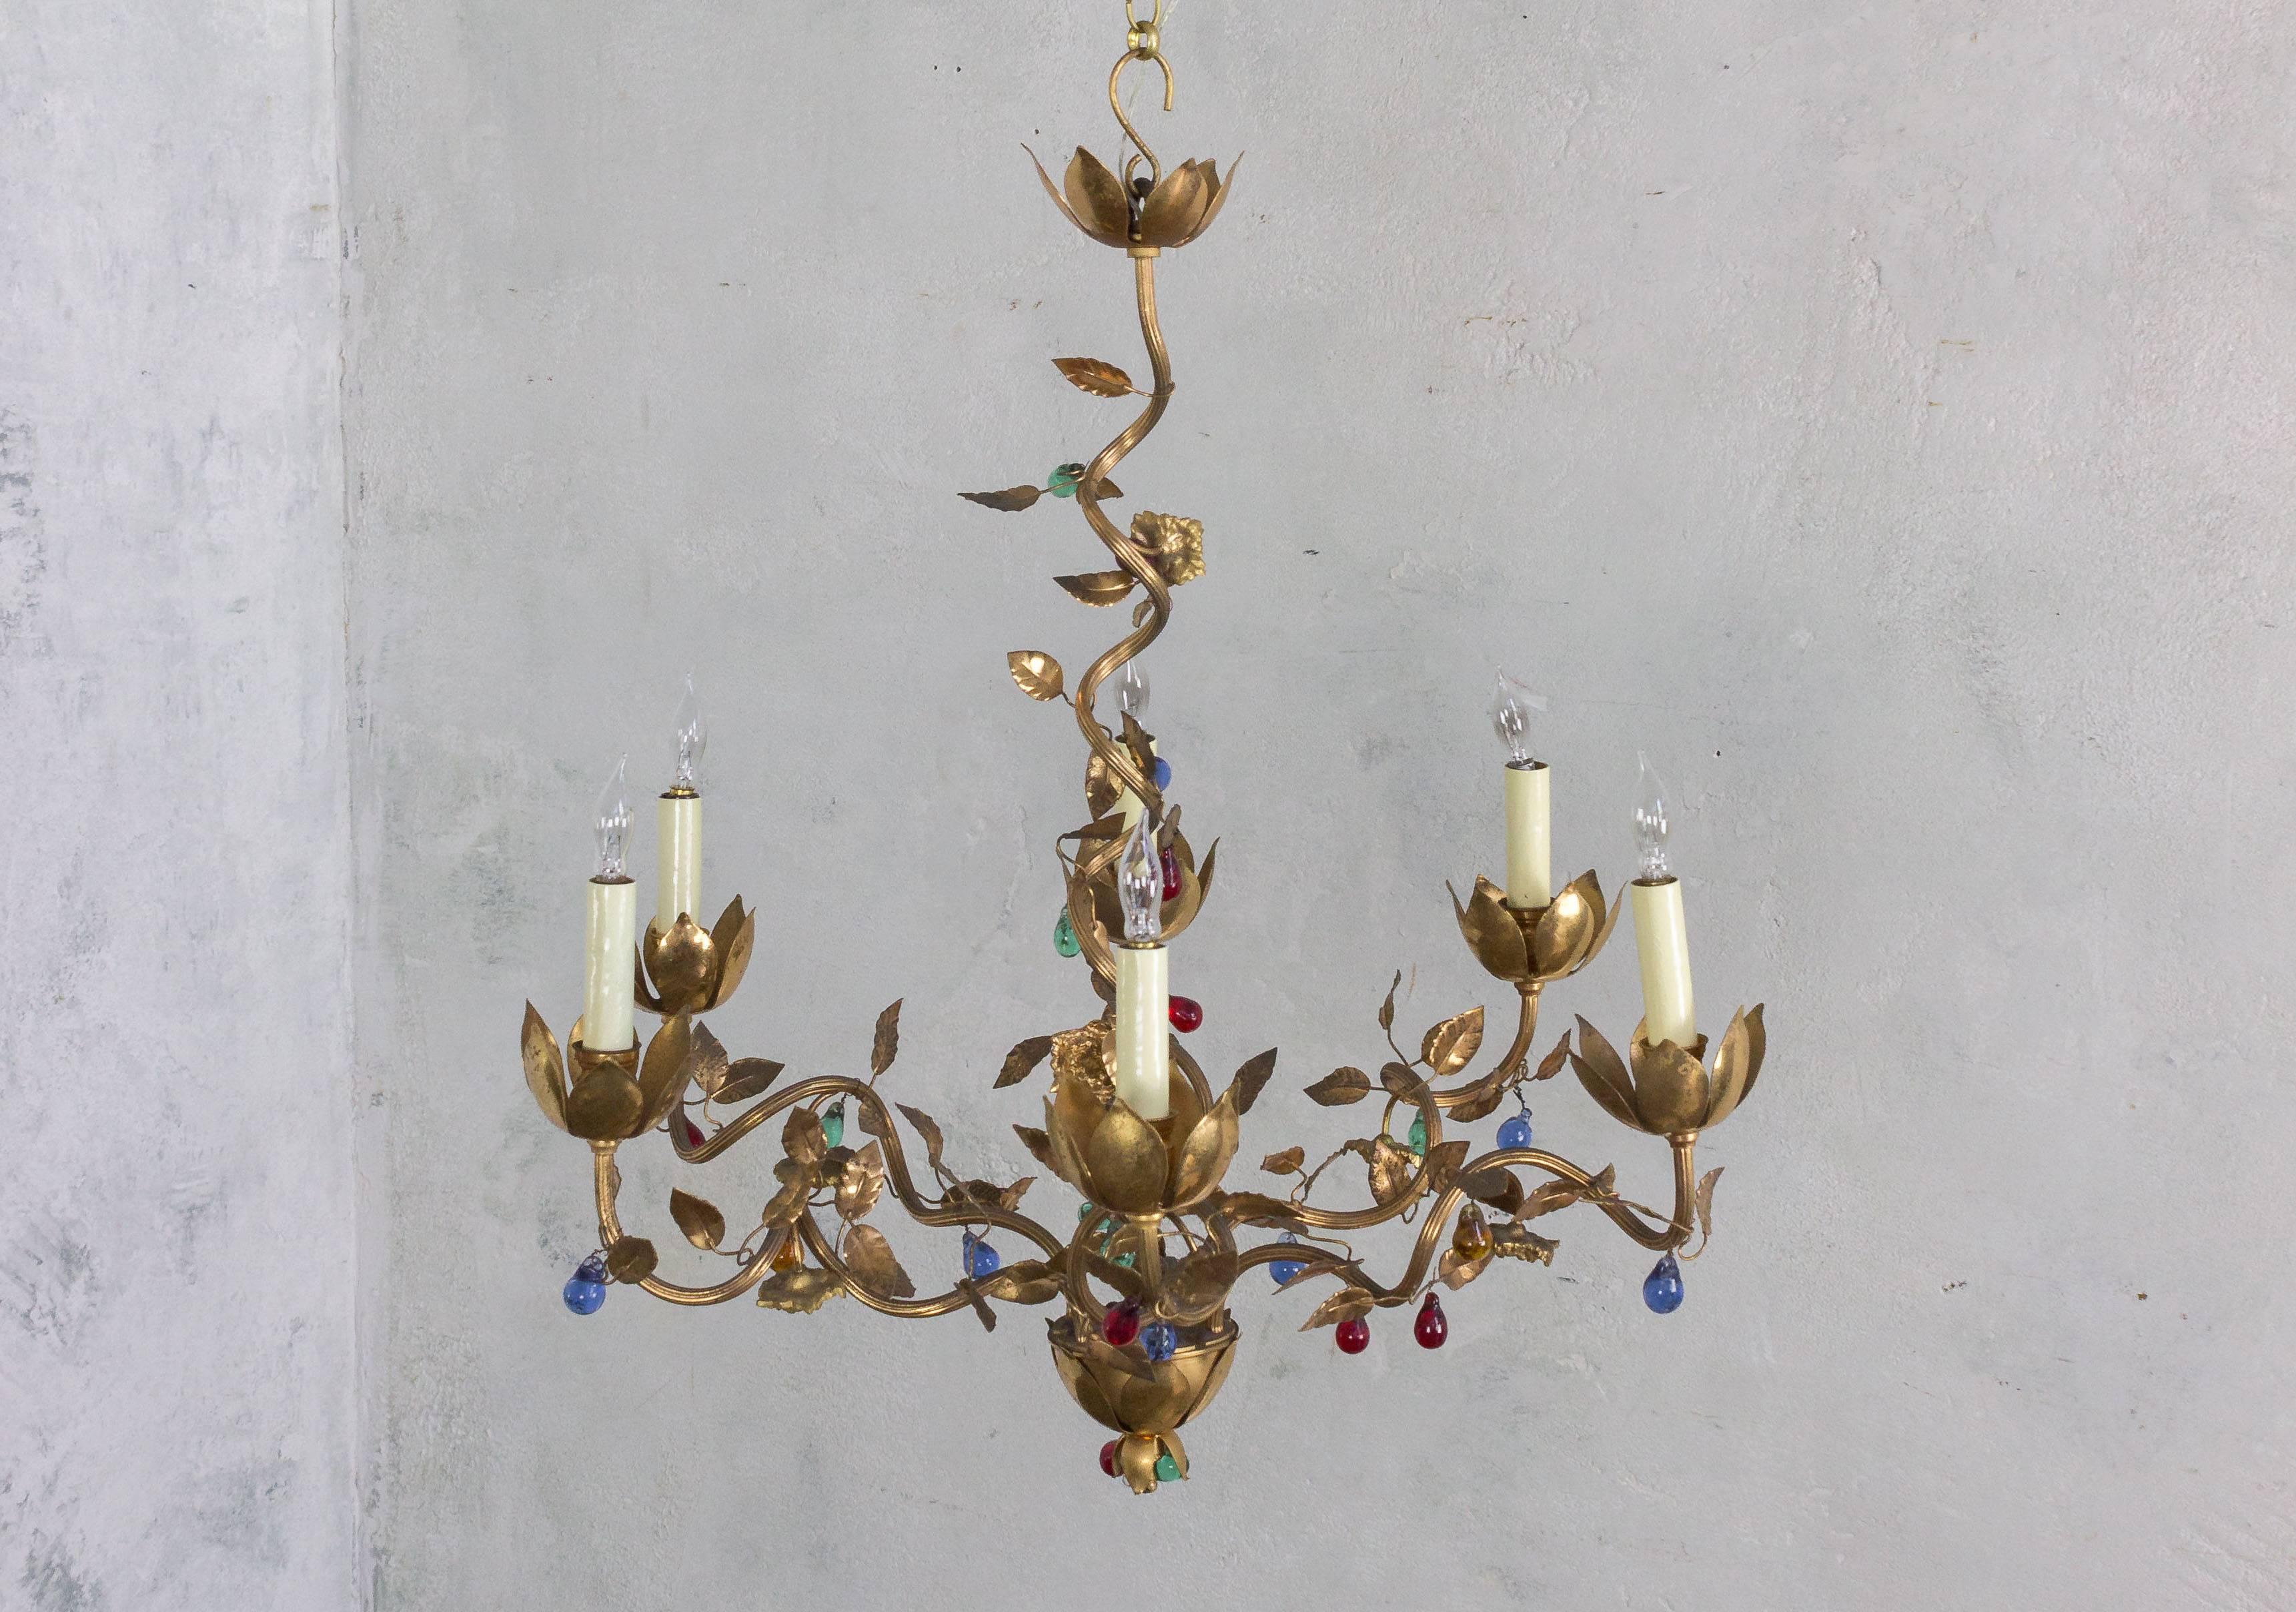 Presenting a remarkable Spanish 1960s gilt metal six-armed chandelier, featuring colored glass accents and intricately designed leaves. This exceptional piece is in very good vintage condition and has been recently rewired, although it is not UL